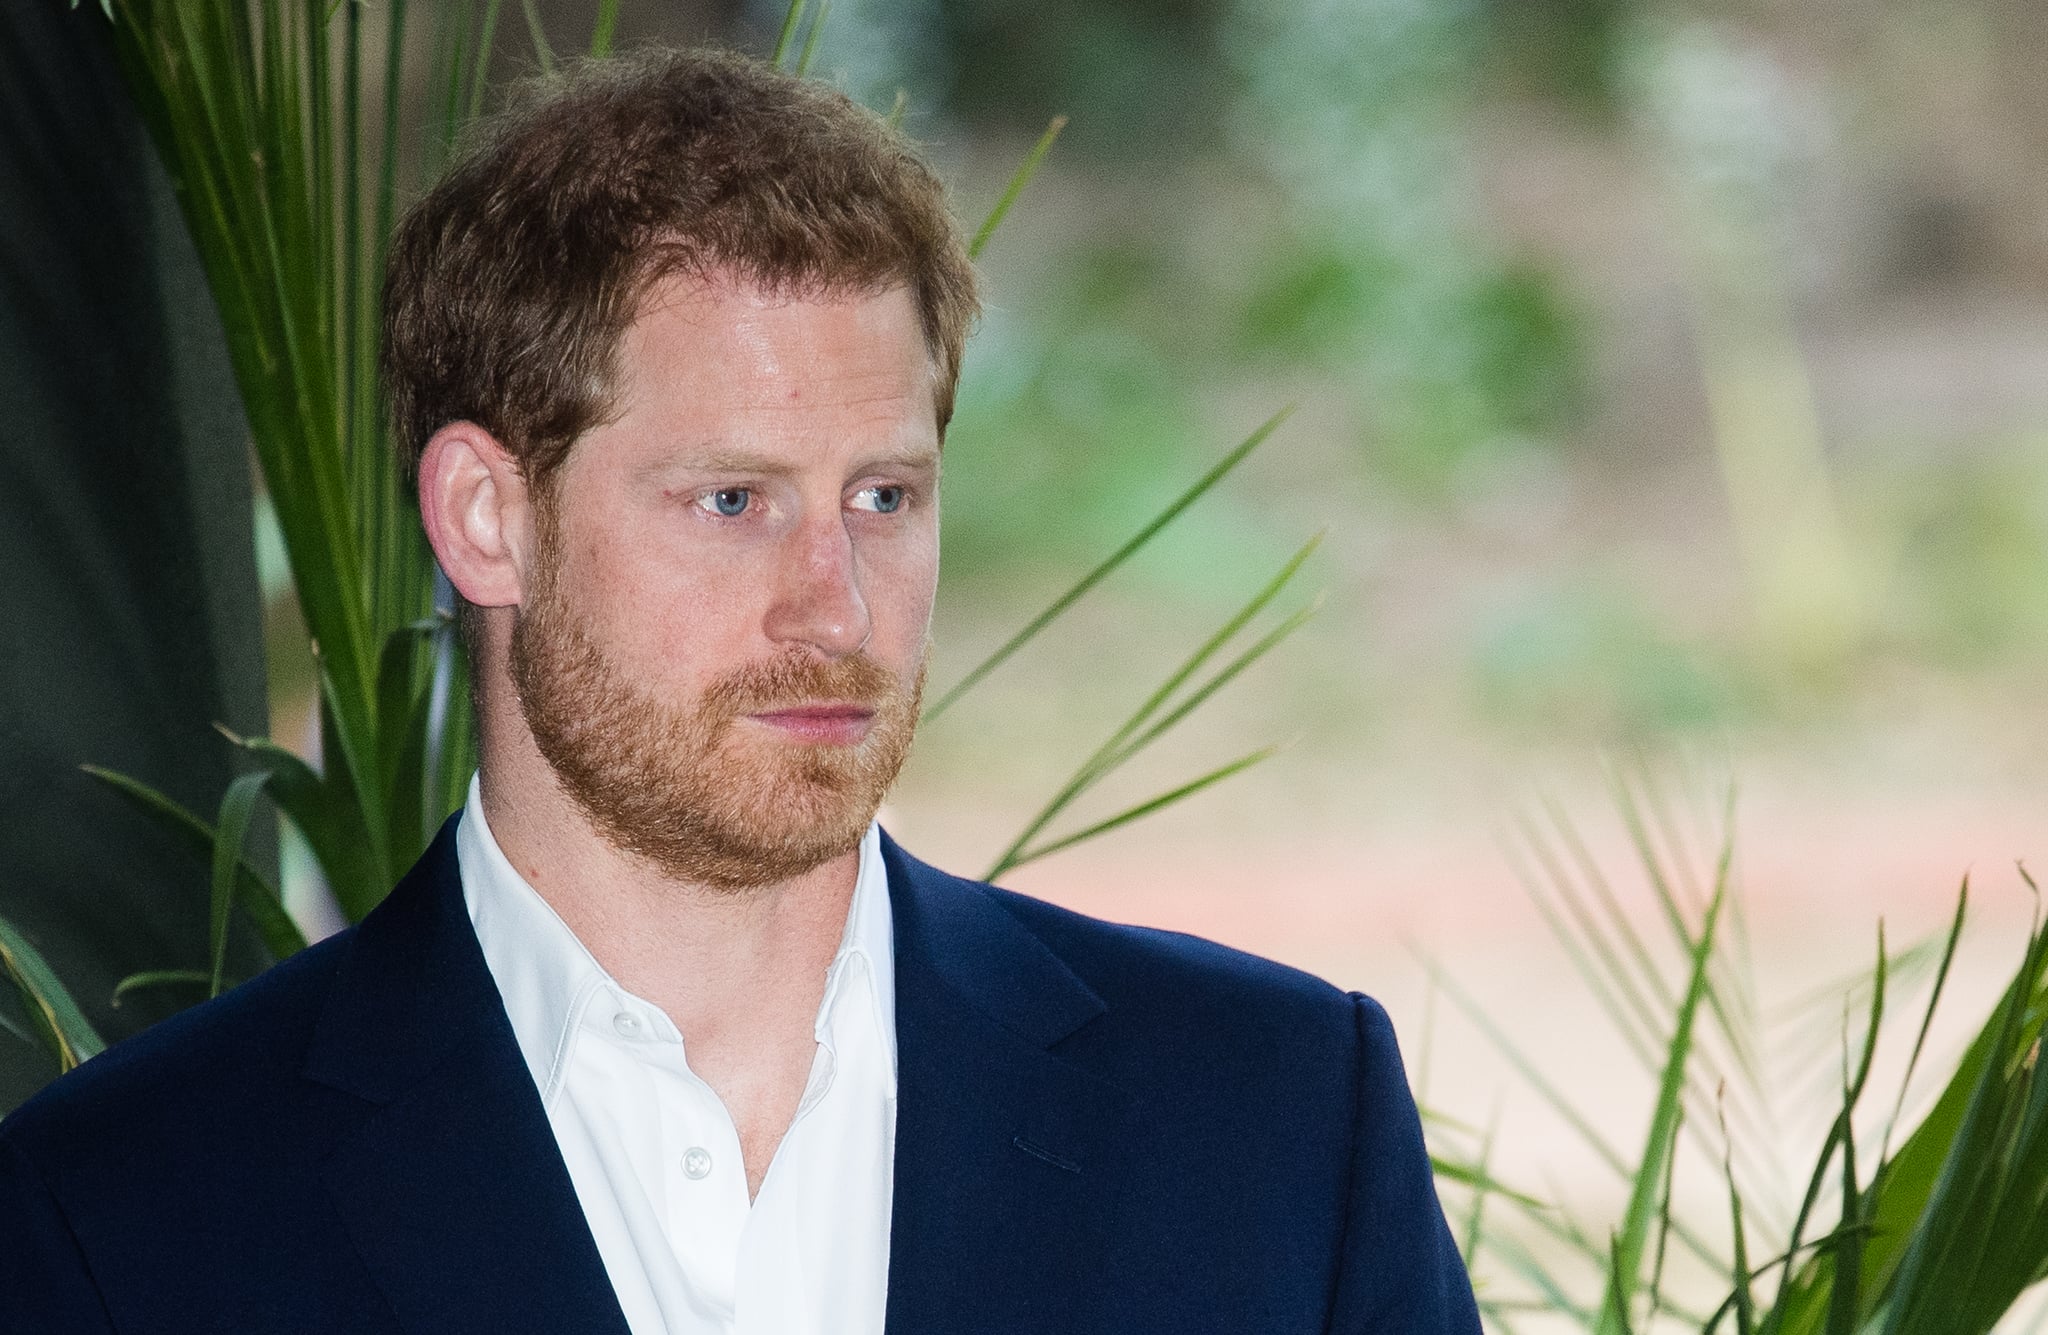 JJOHANNESBURG, SOUTH AFRICA - OCTOBER 02: Prince Harry, Duke of Sussex visits the British High Commissioner